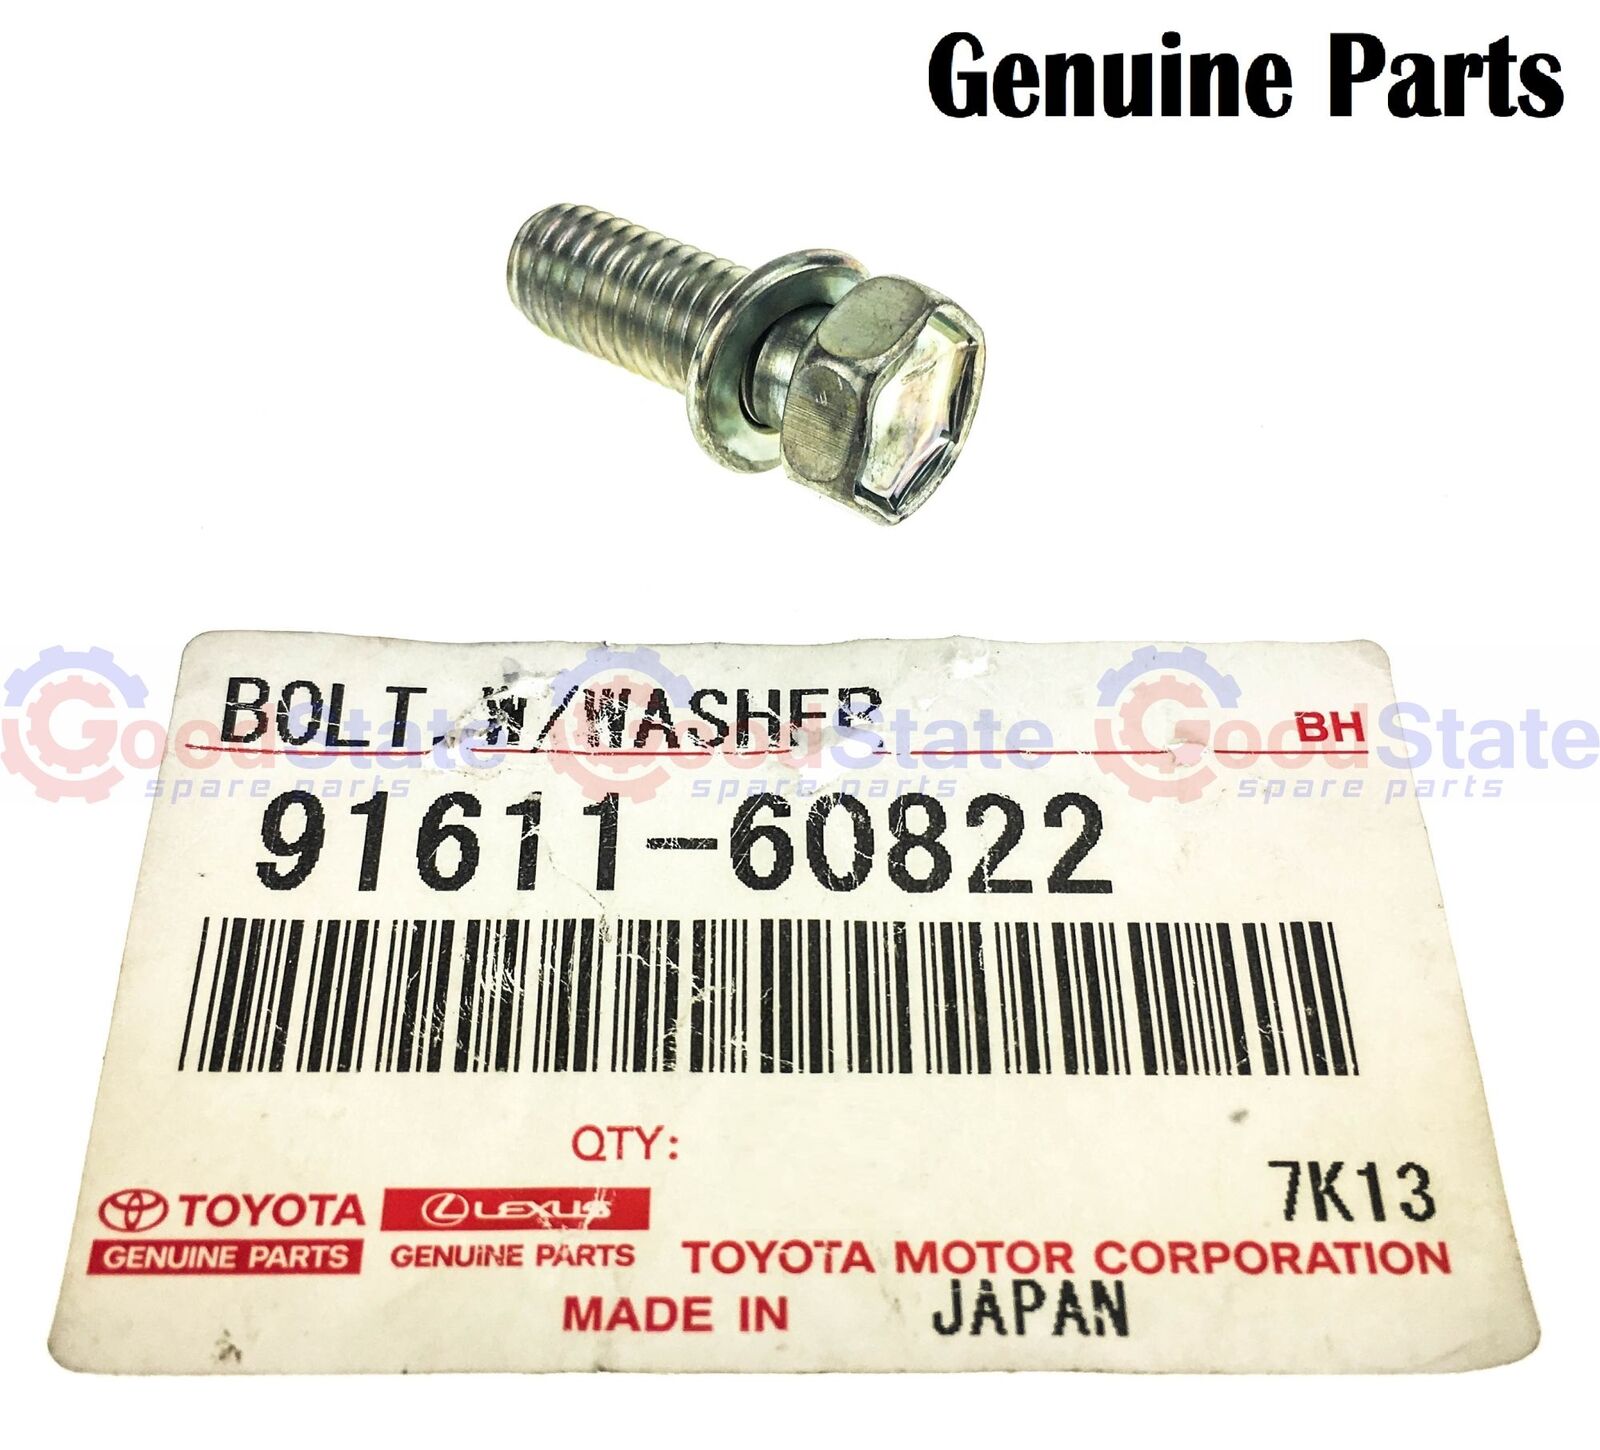 Genuine Toyota Celica ST165 Soarer GZ20 Air Cleaner Duct Bolt w Washer